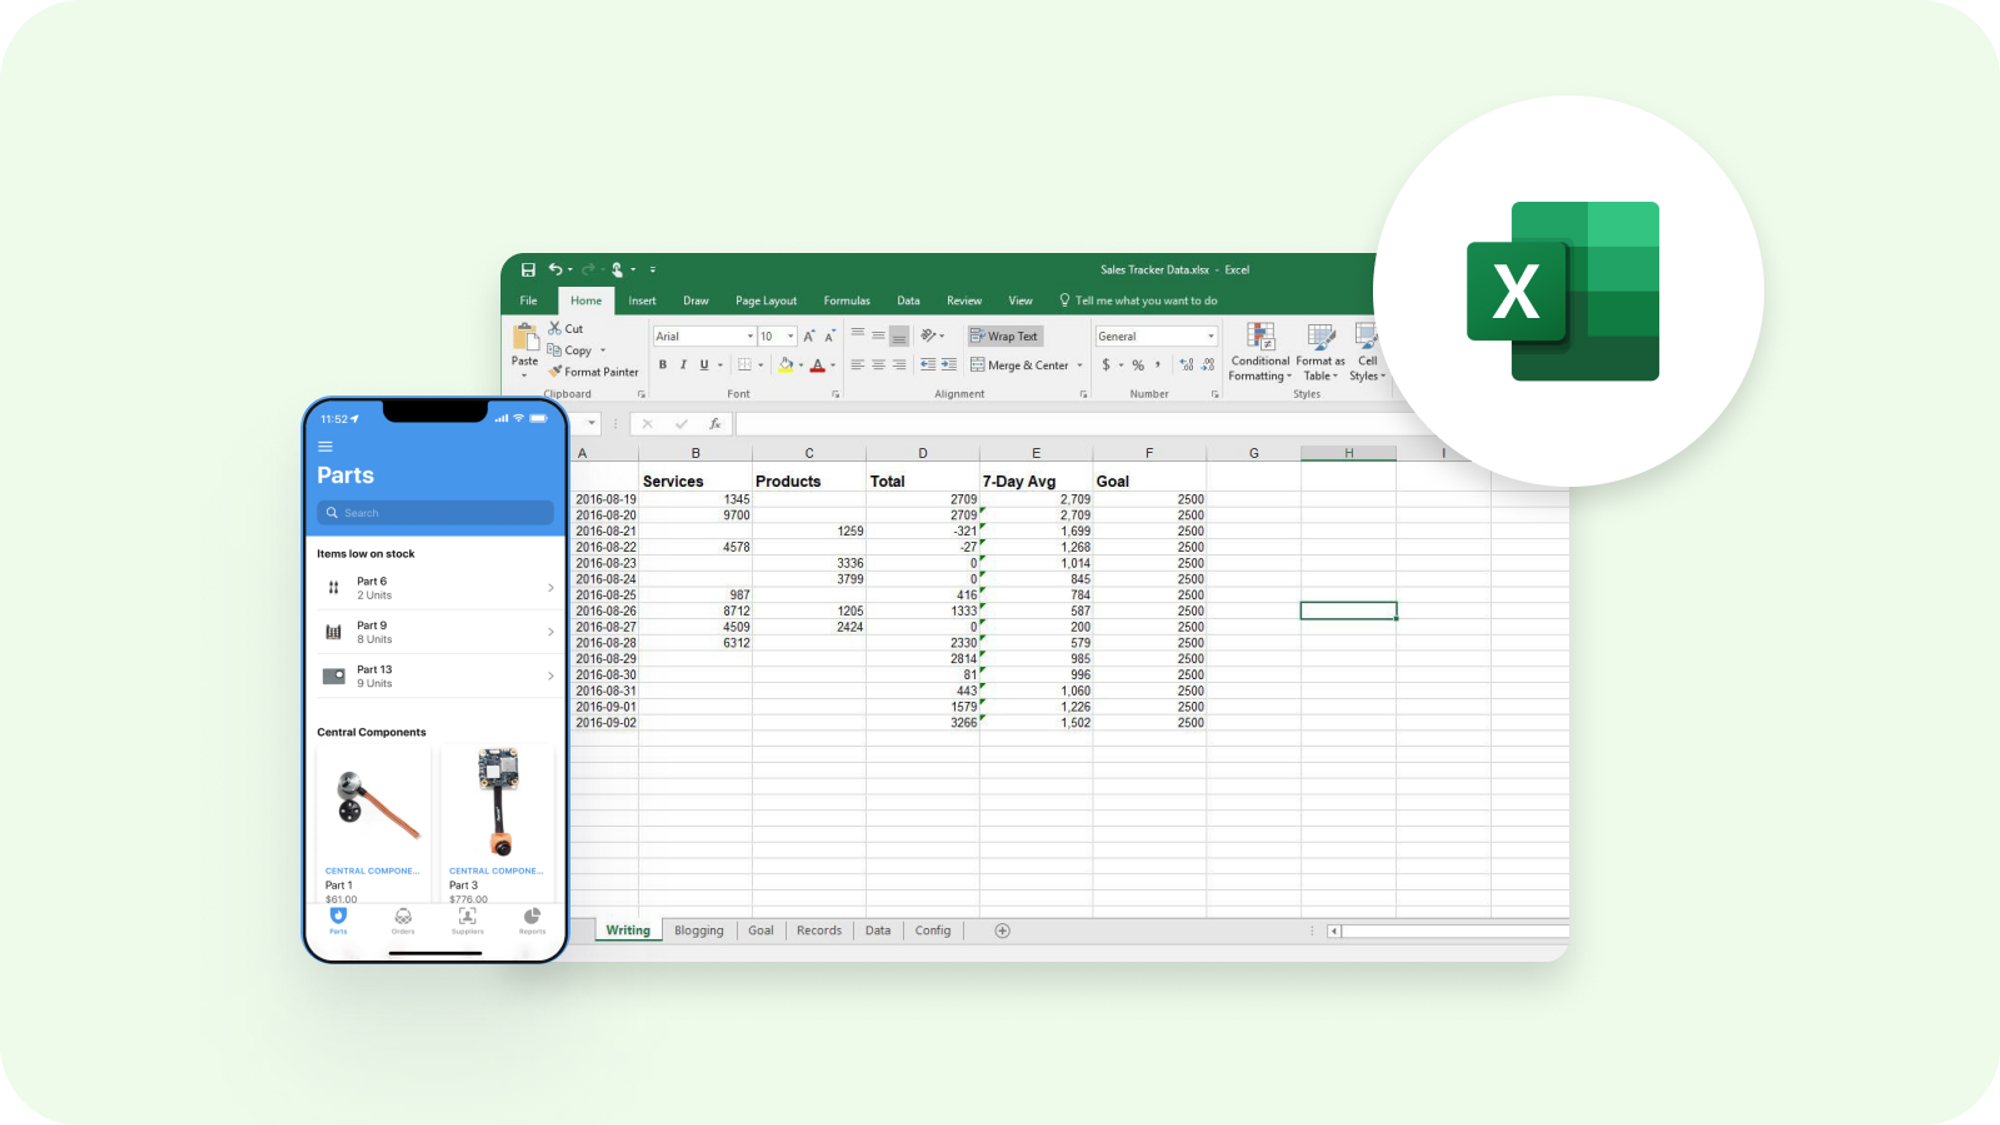 How to Build an Excel-Based Web Application With Glide Pages